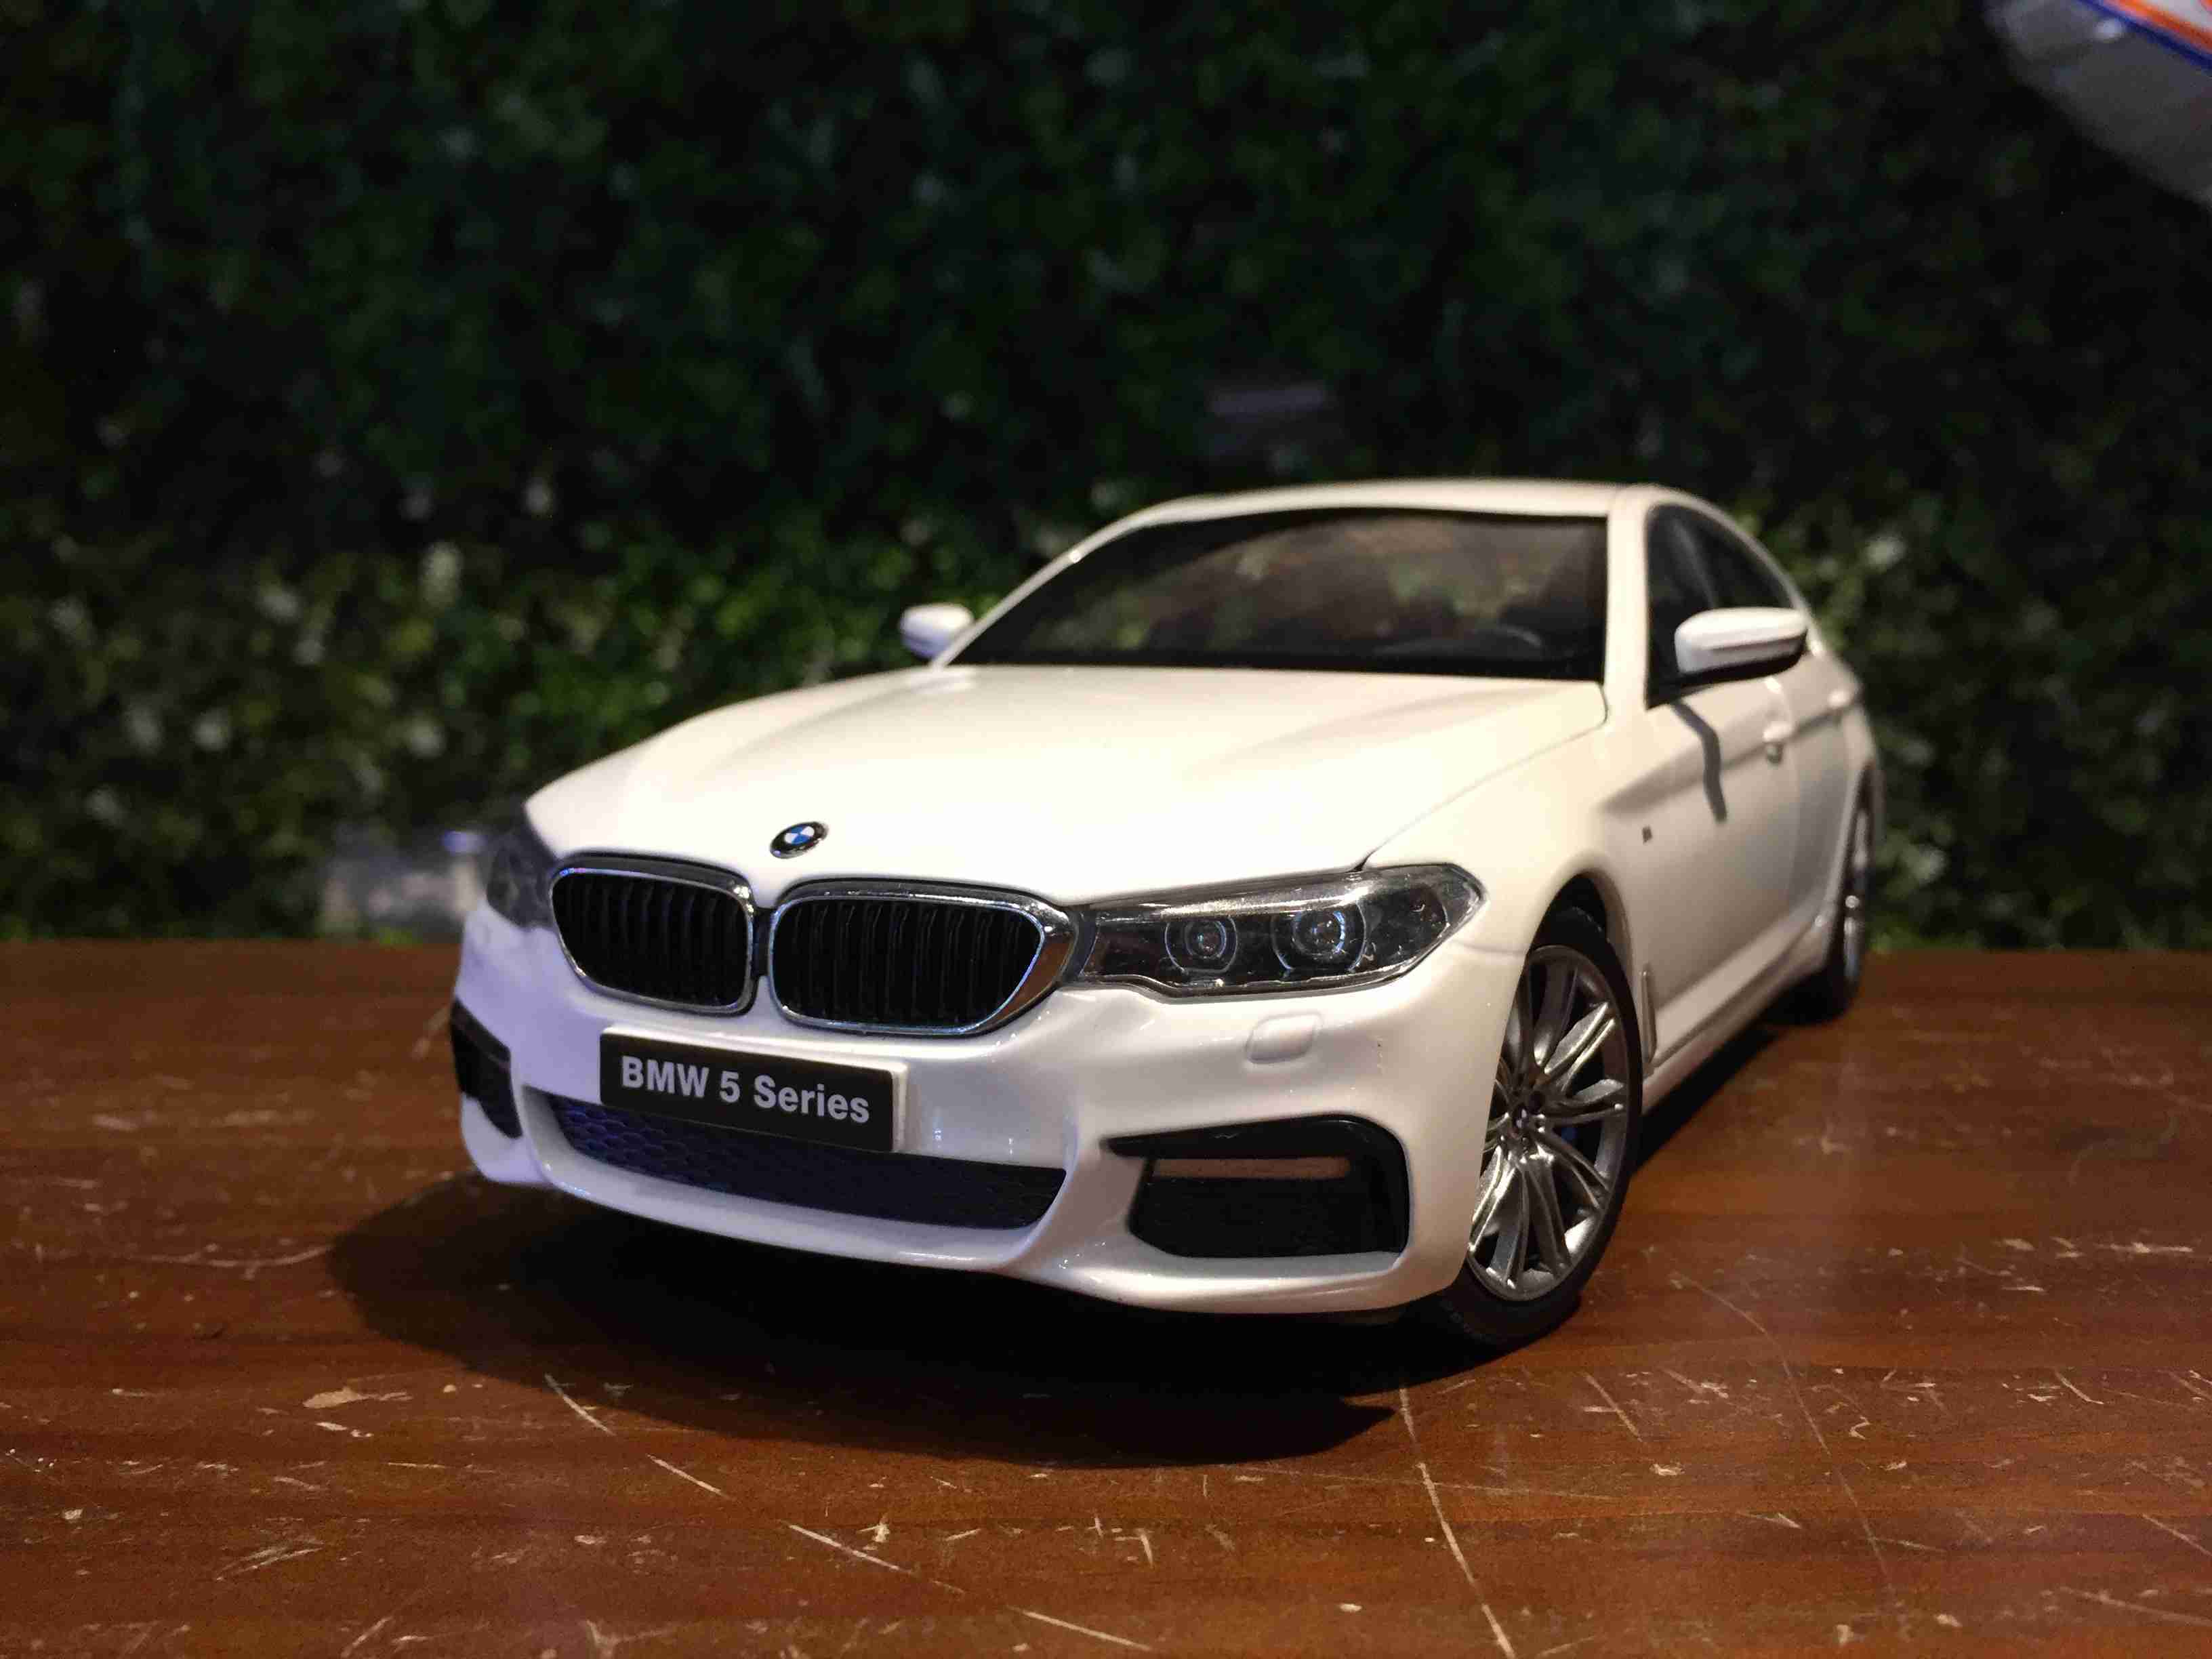 1/18 Kyosho BMW 5 Series (G30) Mineral White 08941W【MGM】